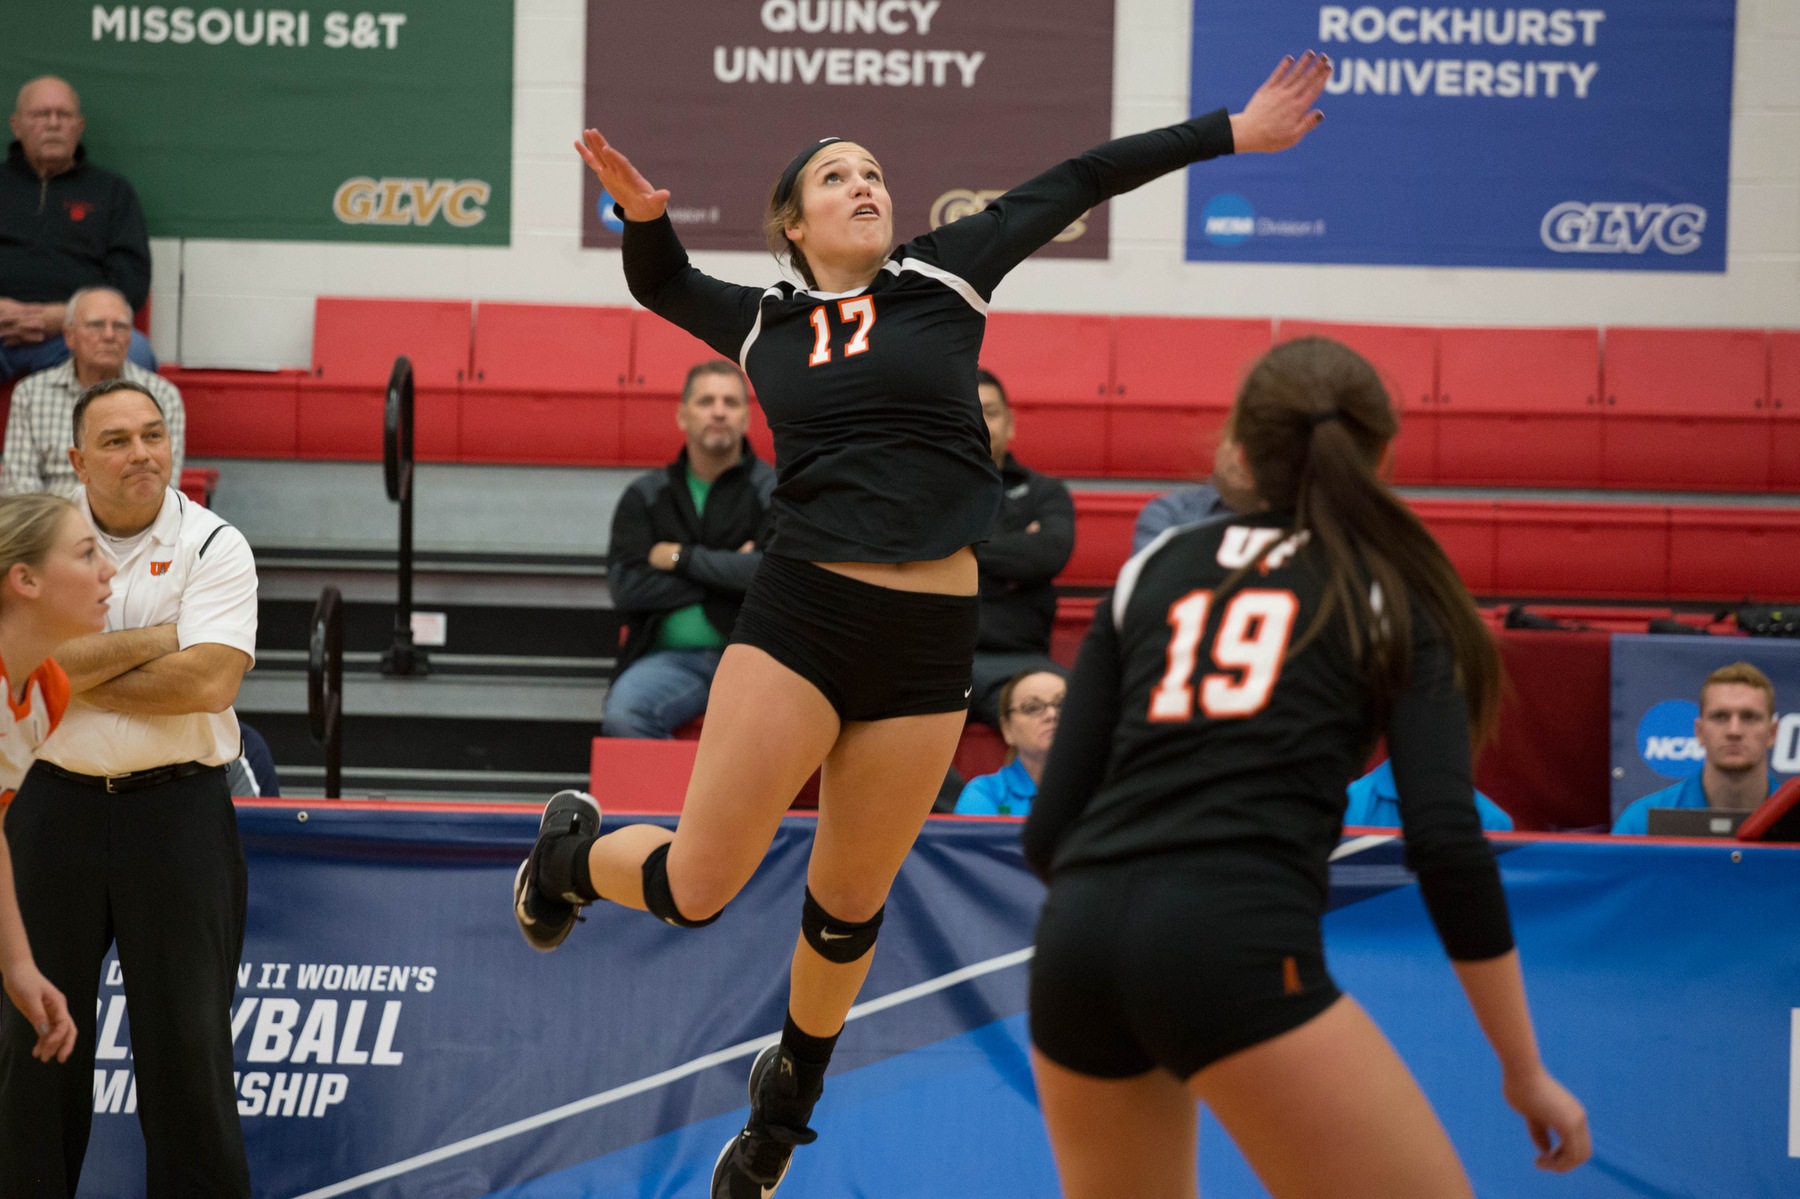 Izzy Murphy finished with a career high 19 kills to help lead the Oilers